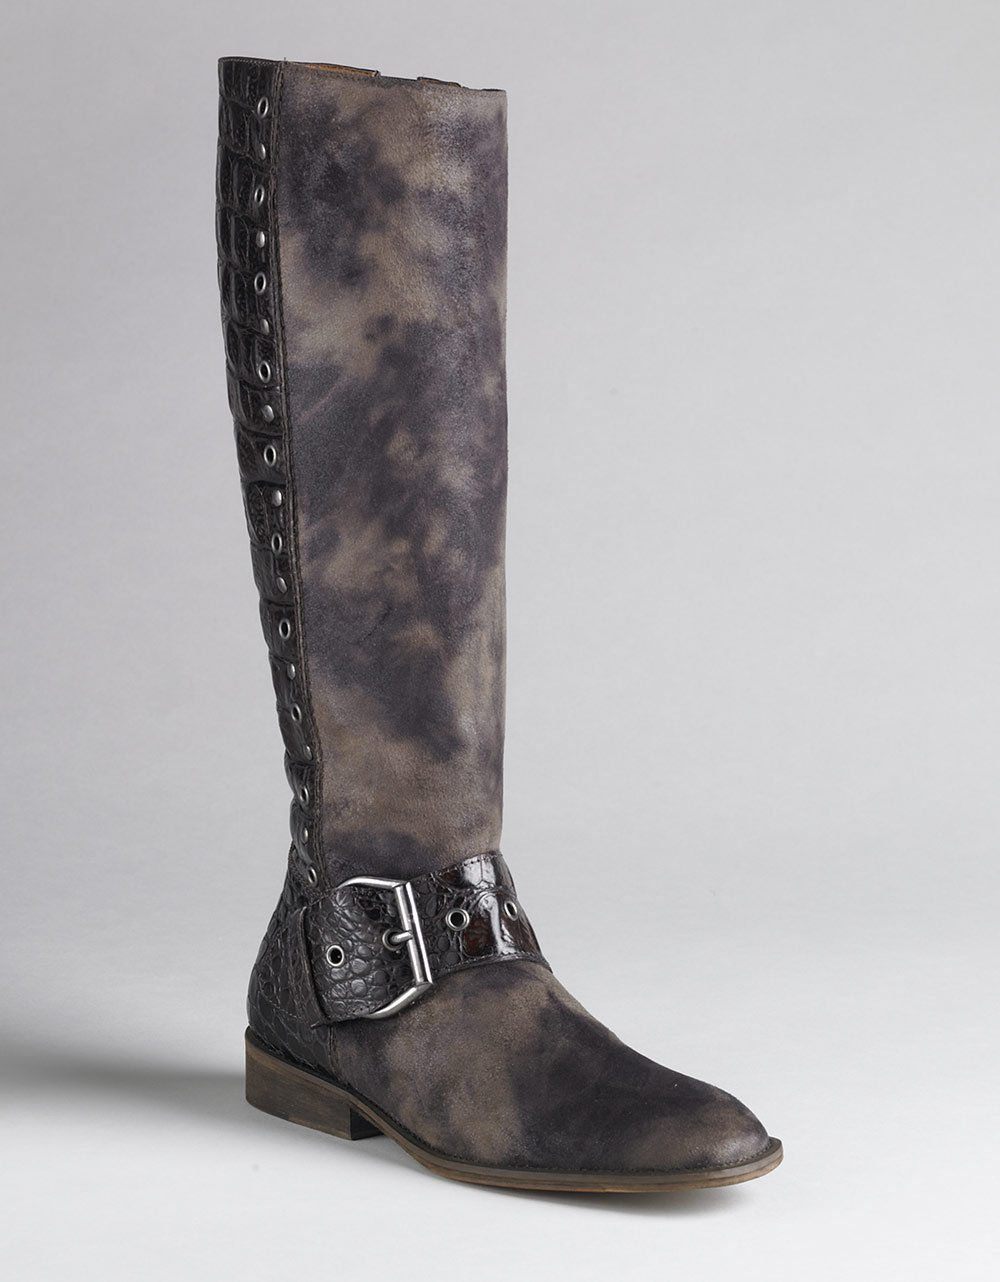 Donald J Pliner Gale Boots in Brown (taupe suede) | Lyst